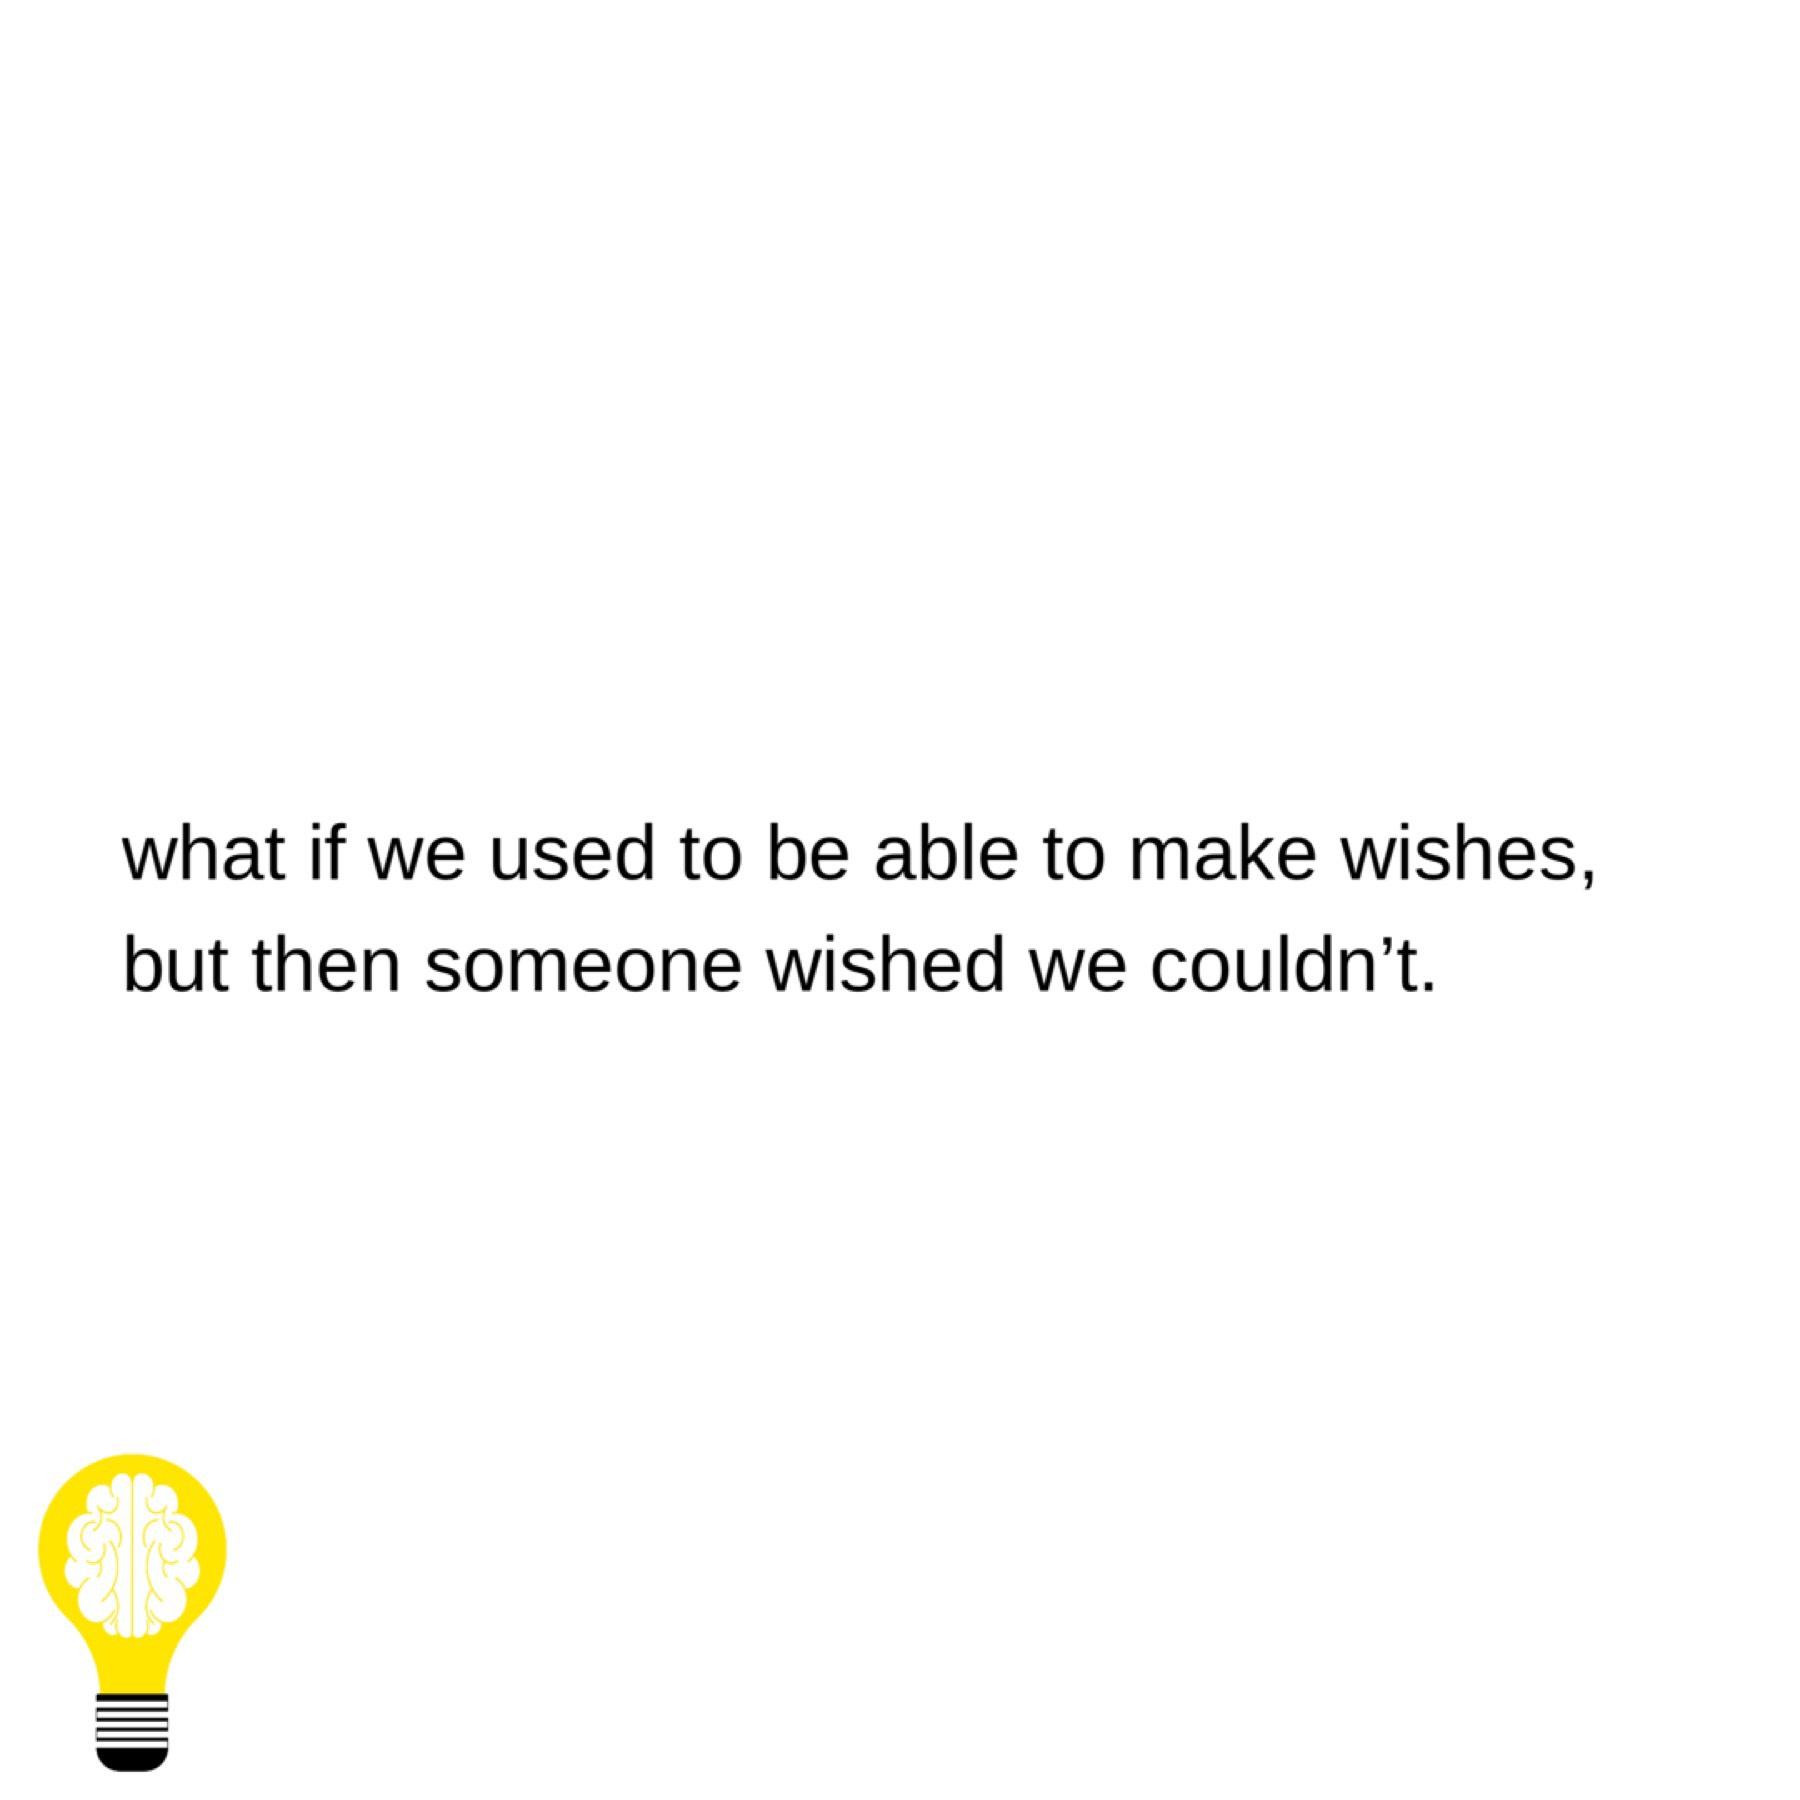 tap for question 🧞‍♂️

you have three wishes

#1 has to start with A
#2 has to start with H
#3 has to start with U

what do you wish for?